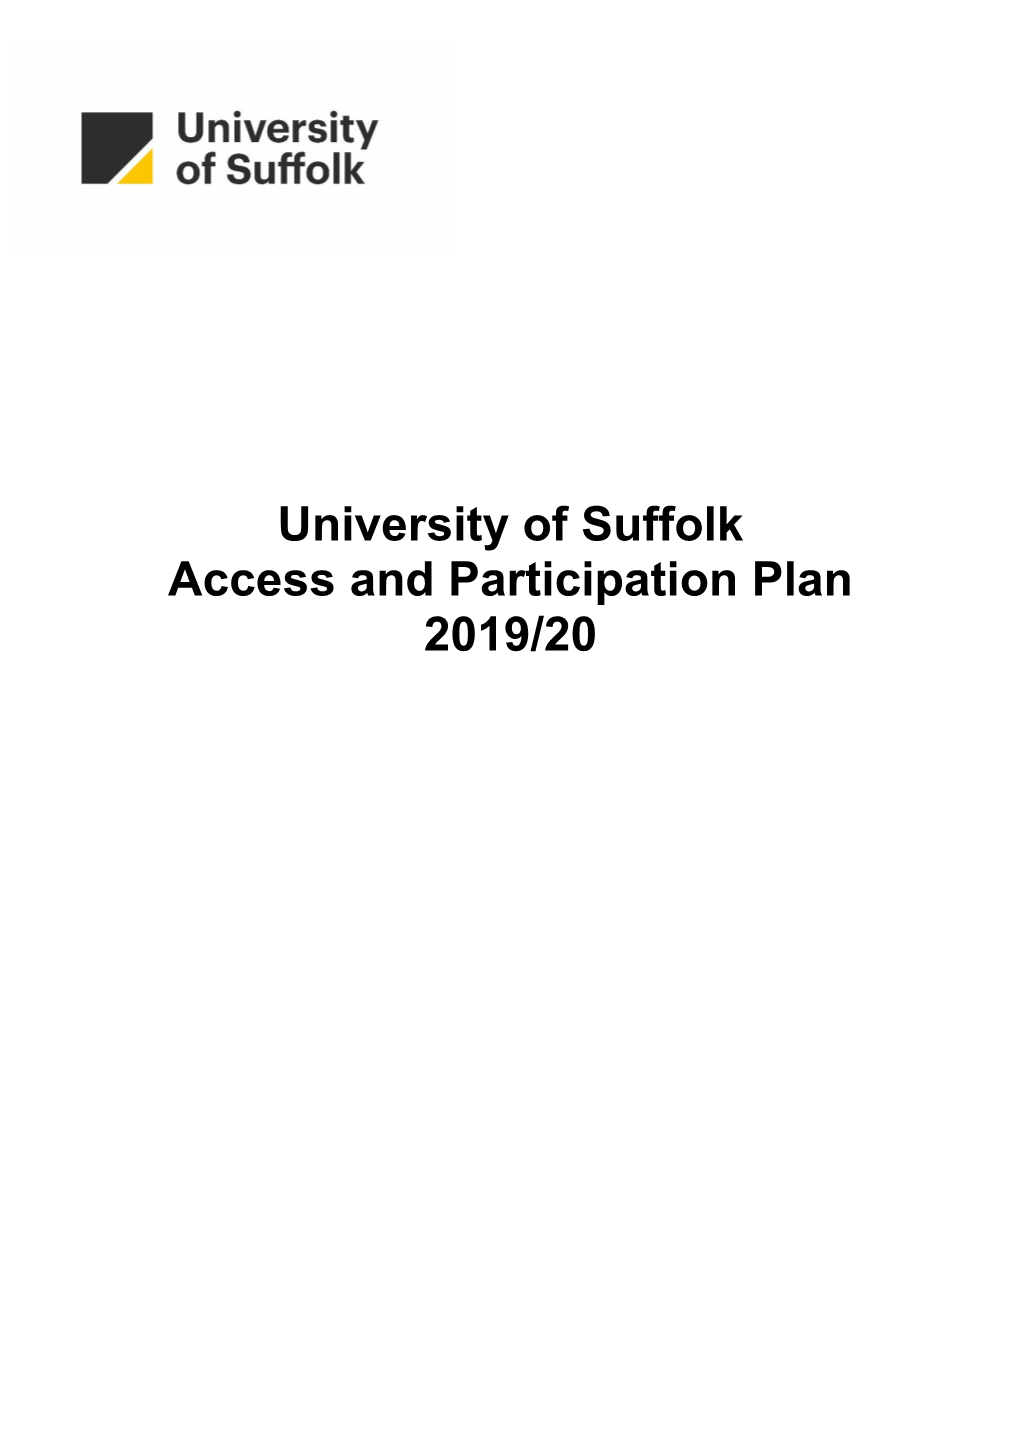 University of Suffolk Access and Participation Plan 2019/20